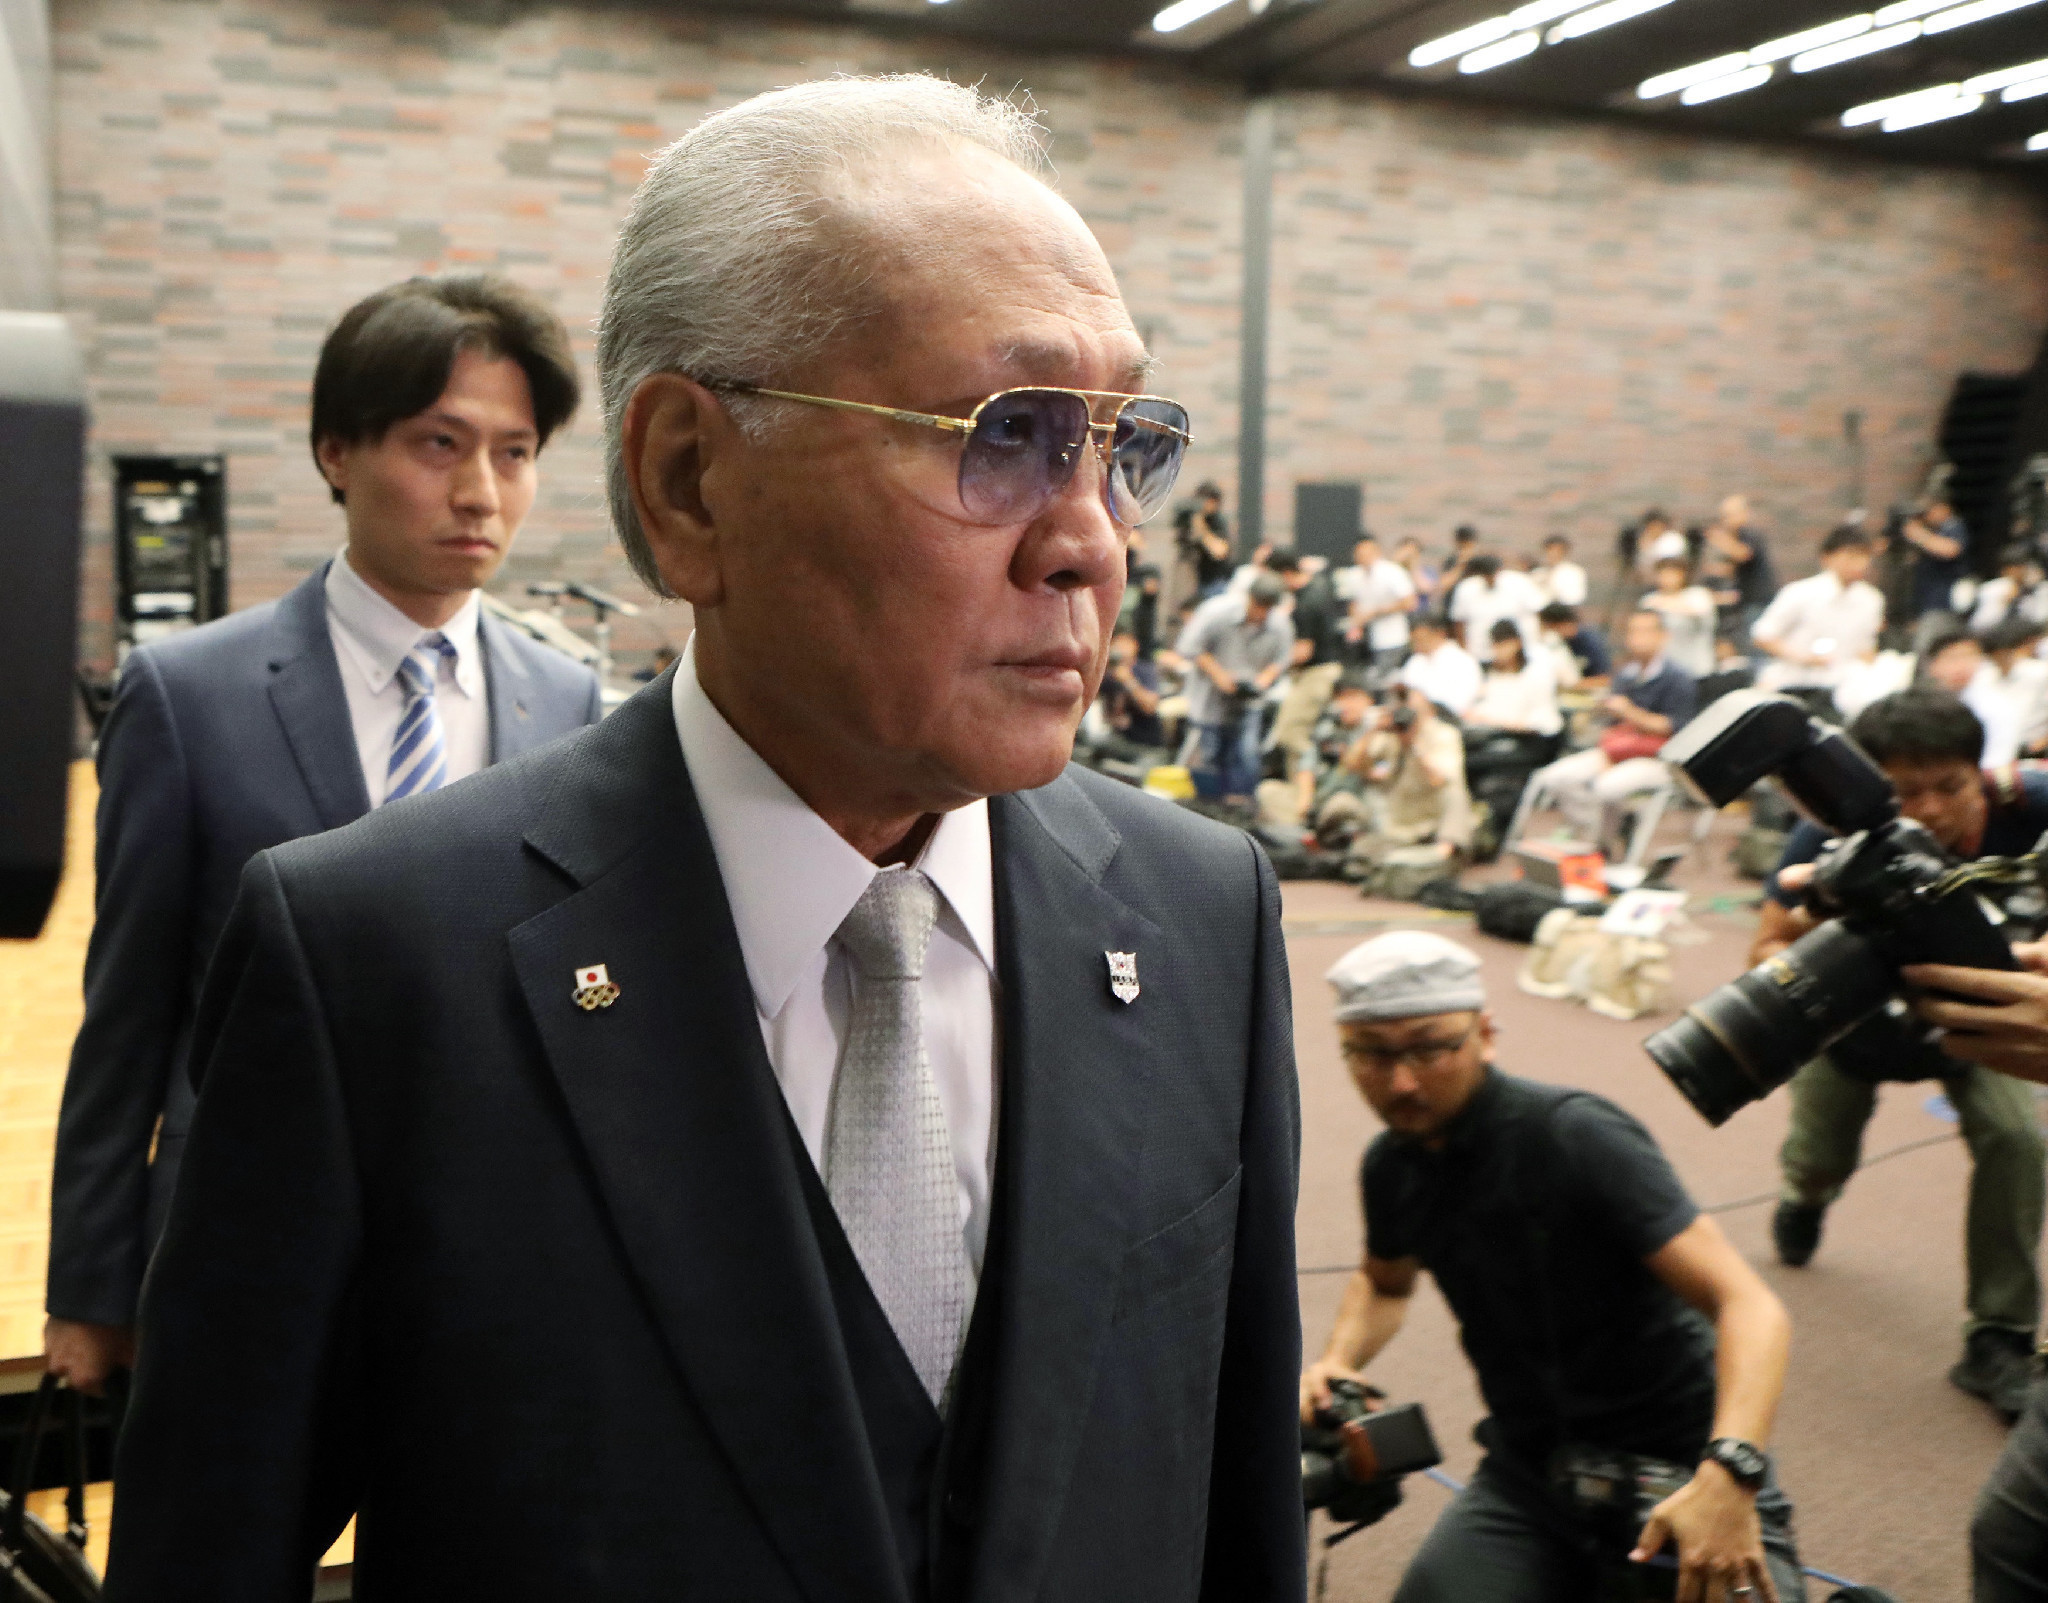 Japan Amateur Boxing Federation President resigns as allegations of misconduct mount